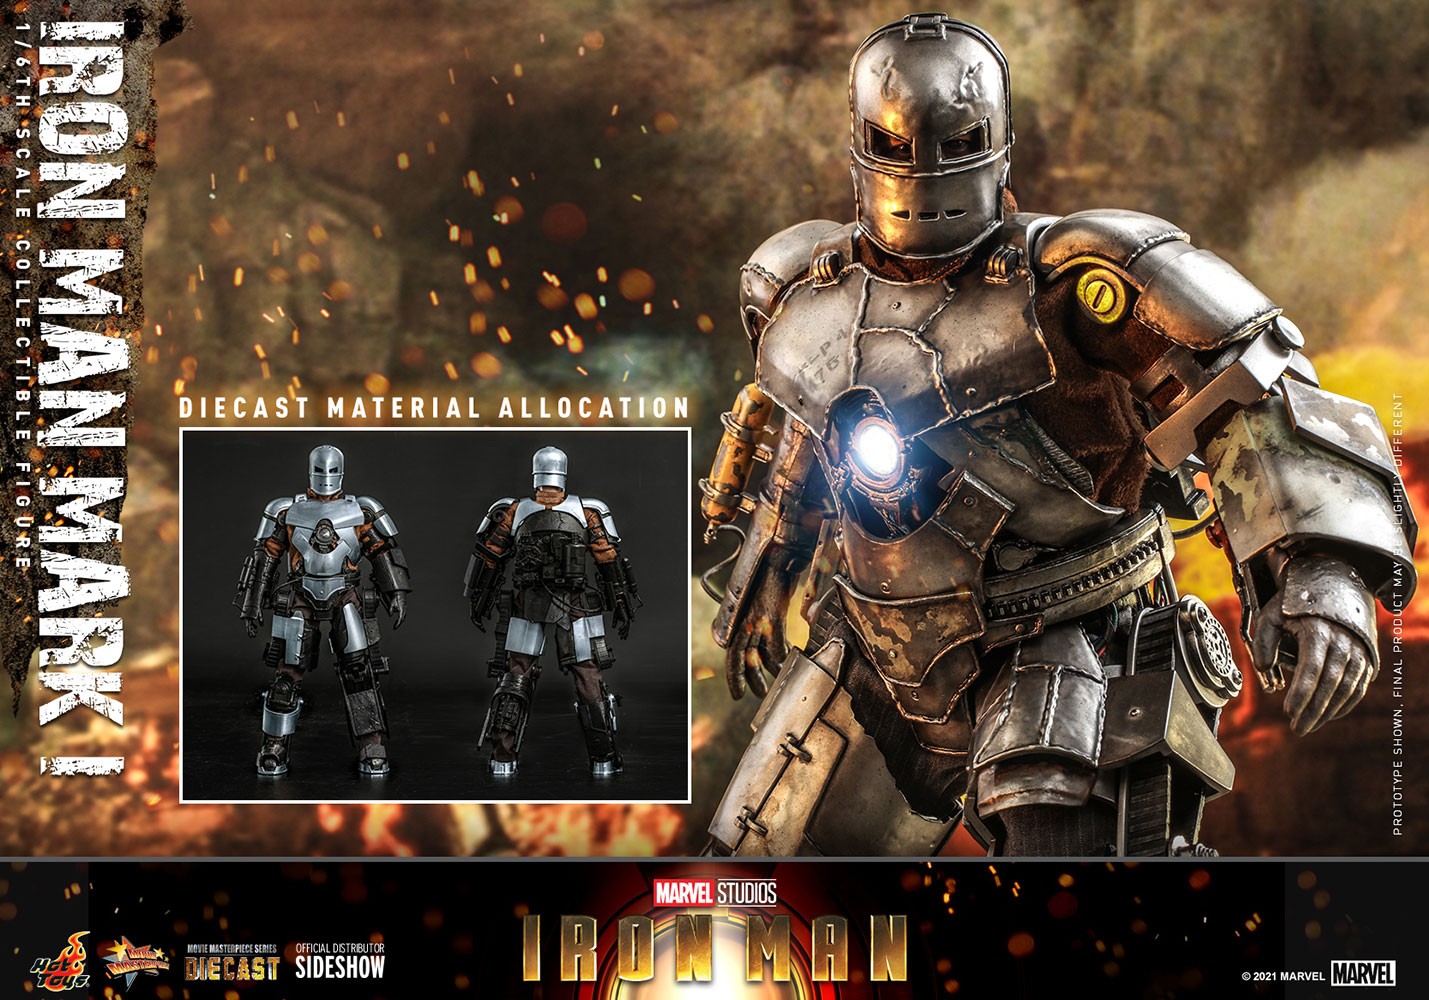 Iron Man Mark I (Special Edition) Exclusive Edition (Prototype Shown) View 18